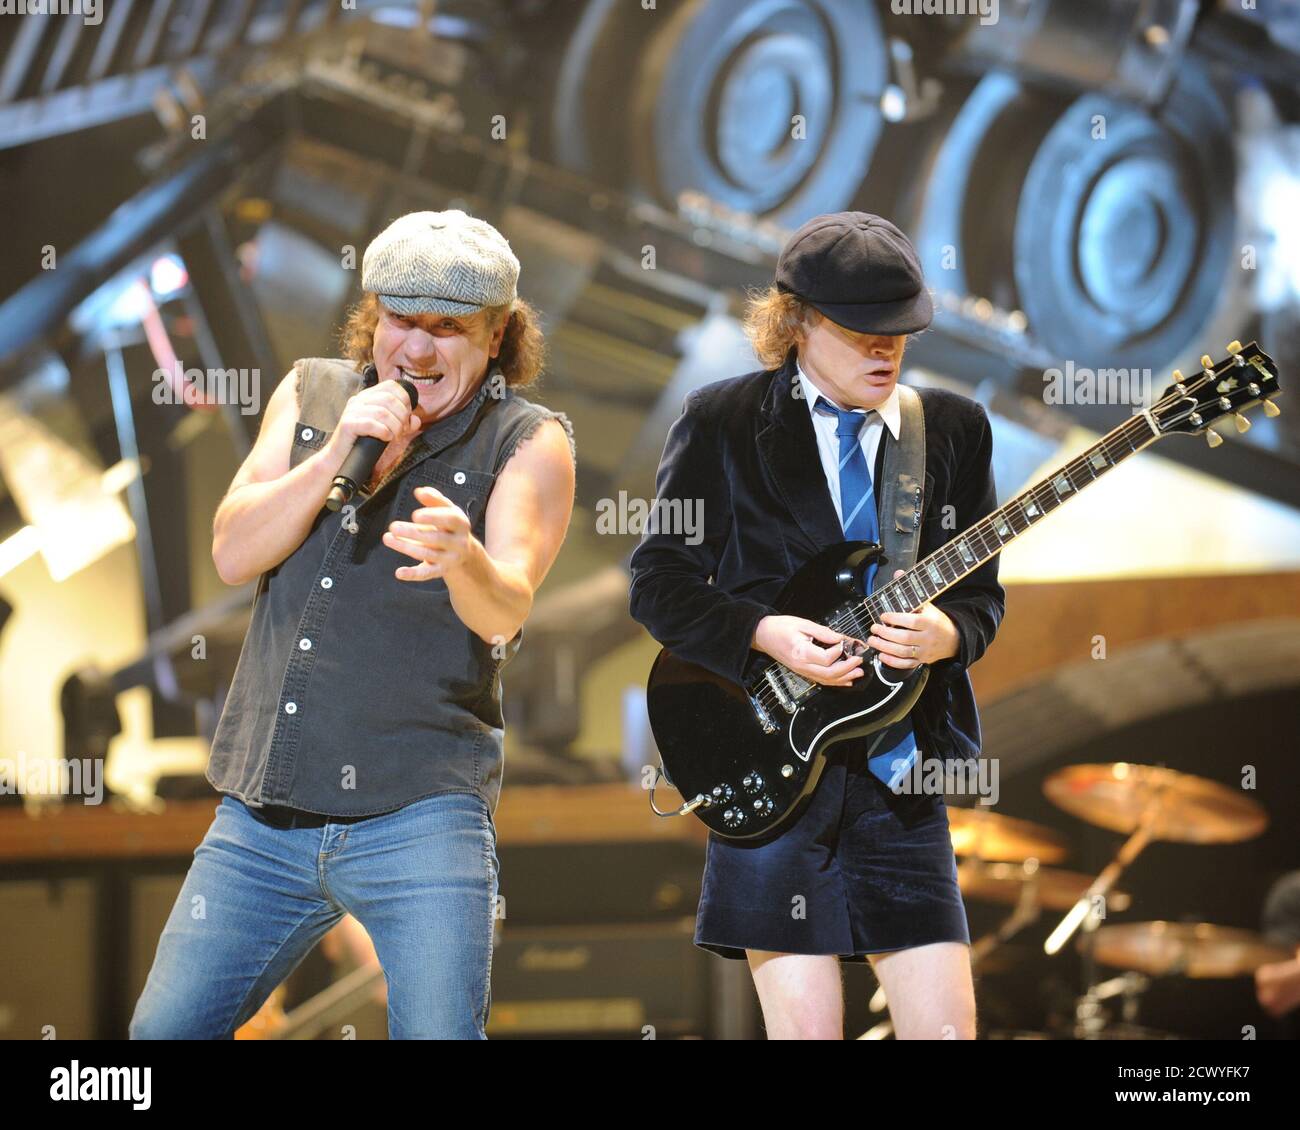 **FILE PHOTO** AC/DC Reunite with New Album On The Way. SUNRISE, FL - DECEMBER 20 : Brian Johnson and Angus Young of AC/DC perform at the Bank Atlantic Center on December 20, 2008 in Sunrise Florida. Credit: mpi04/MediaPunch Stock Photo